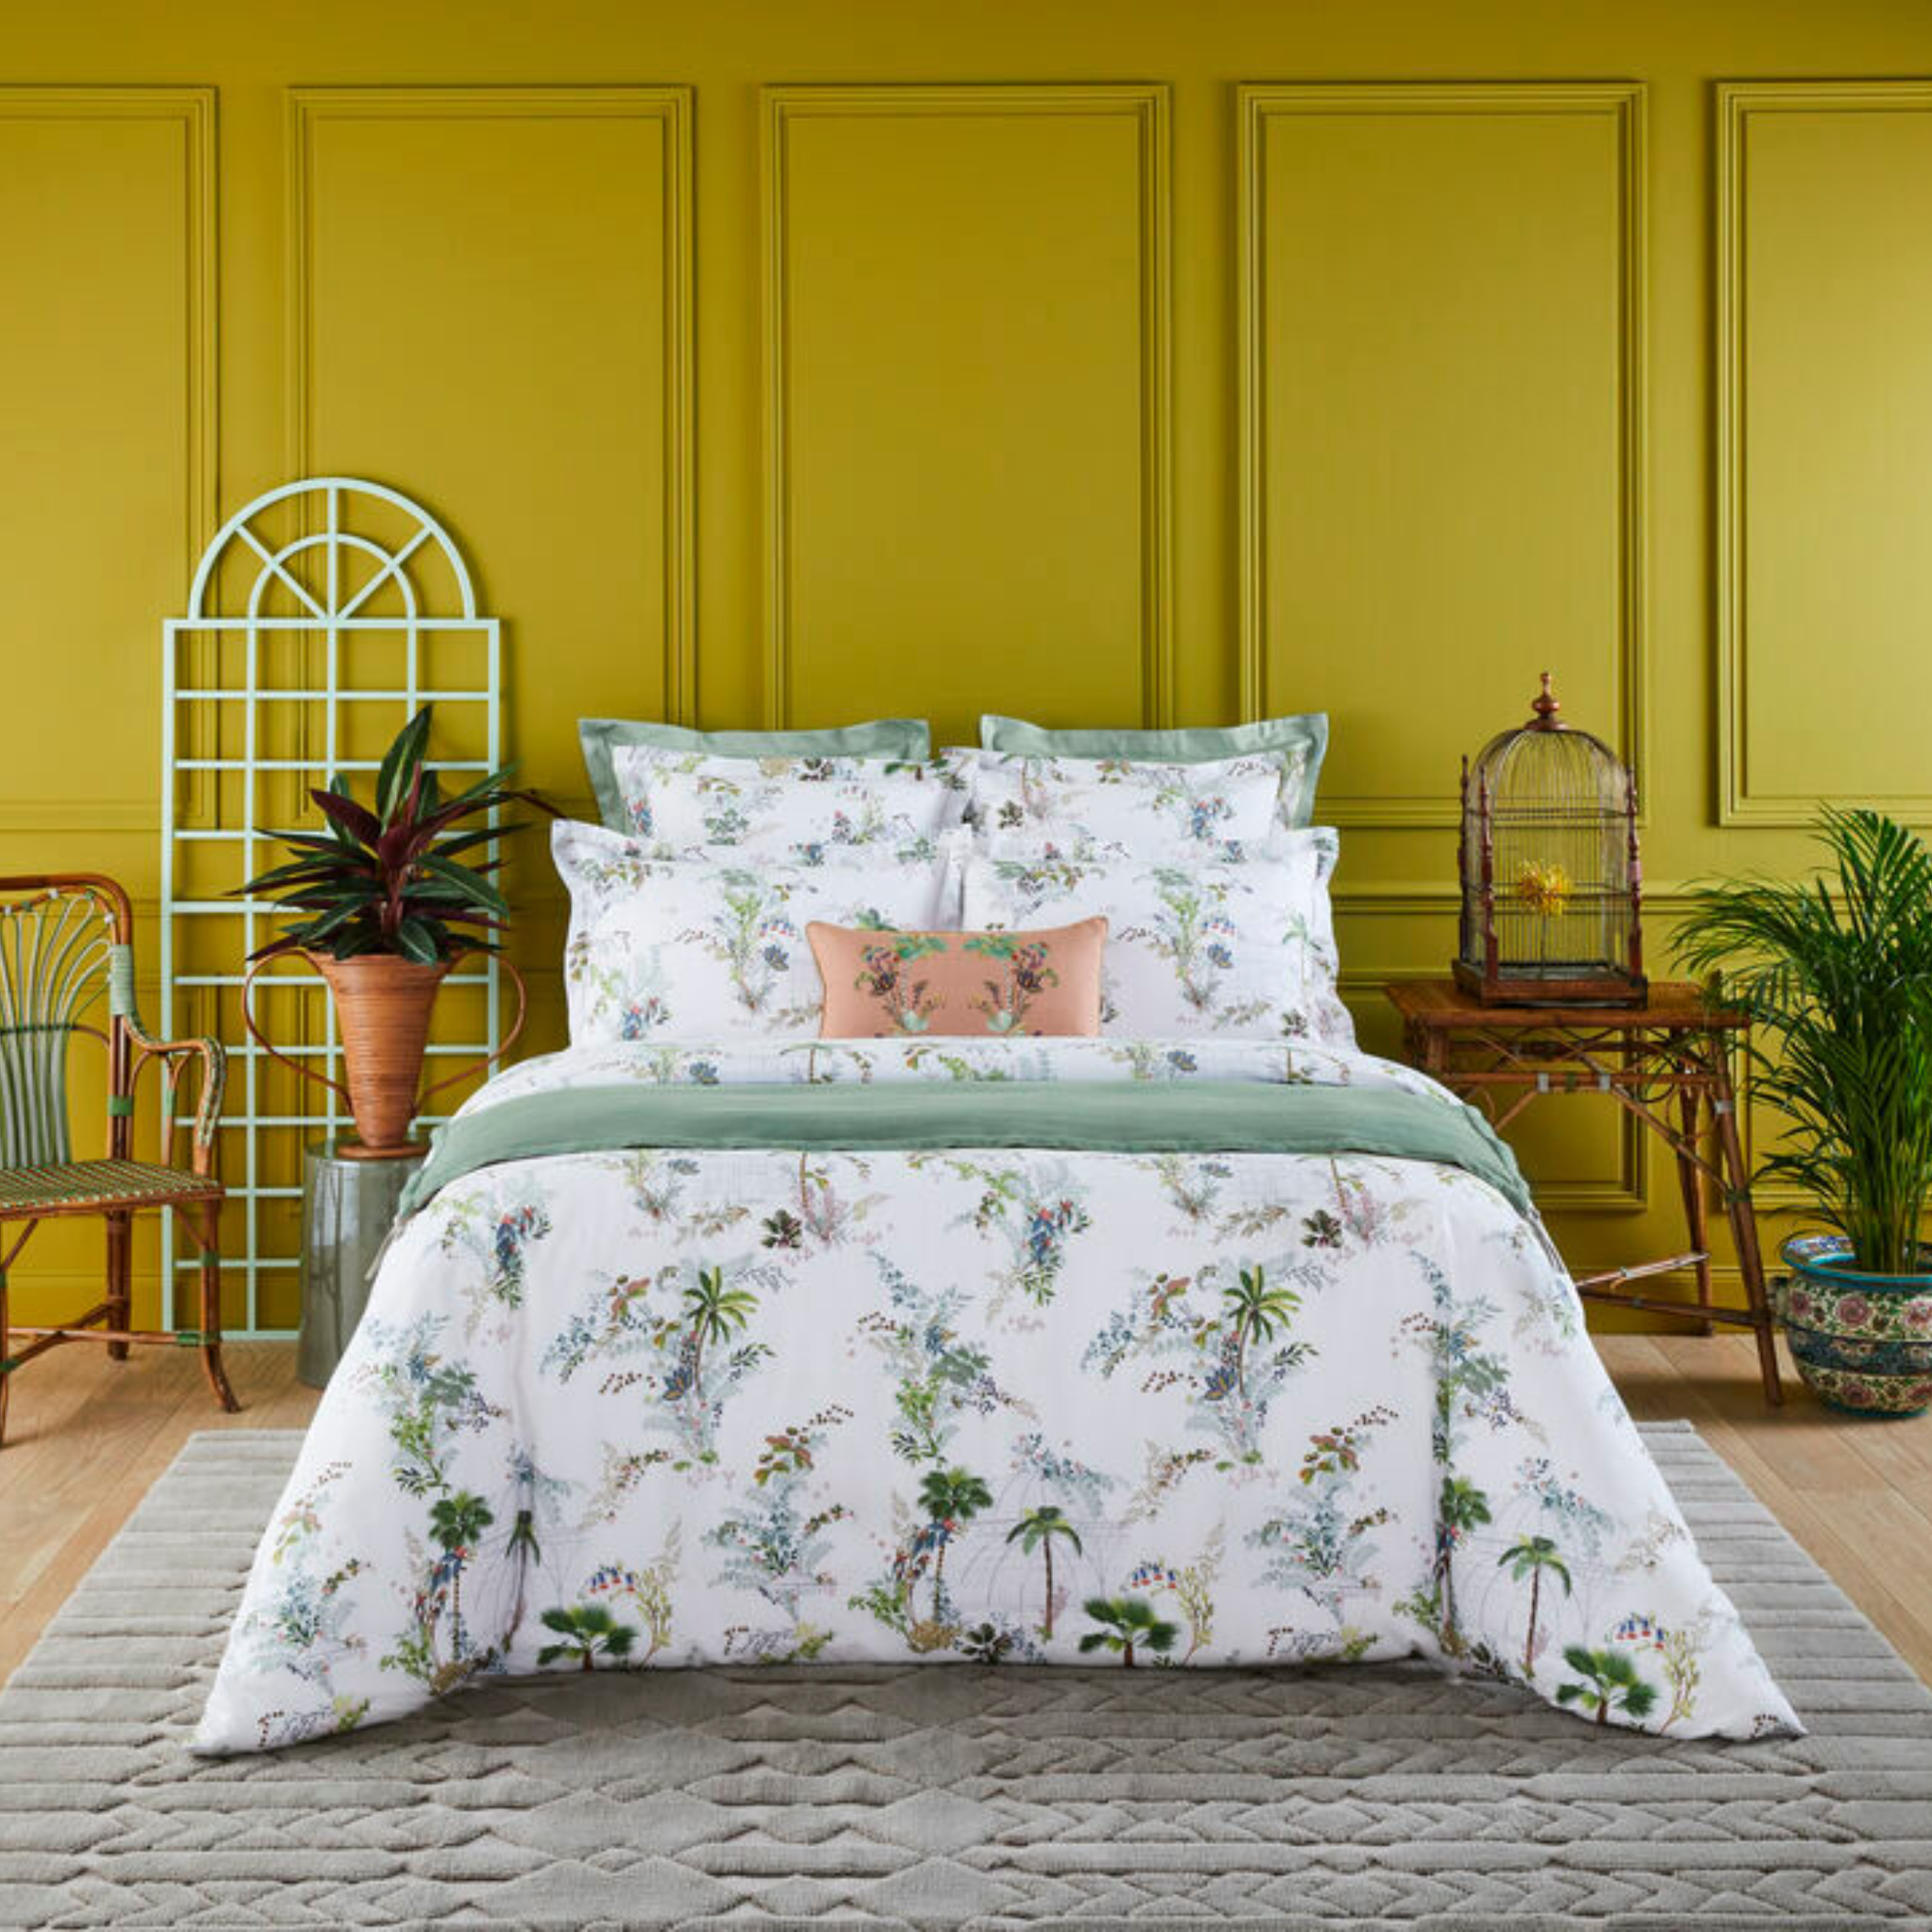 Lifestyle Image for Yves Delorme Jardins Bedding